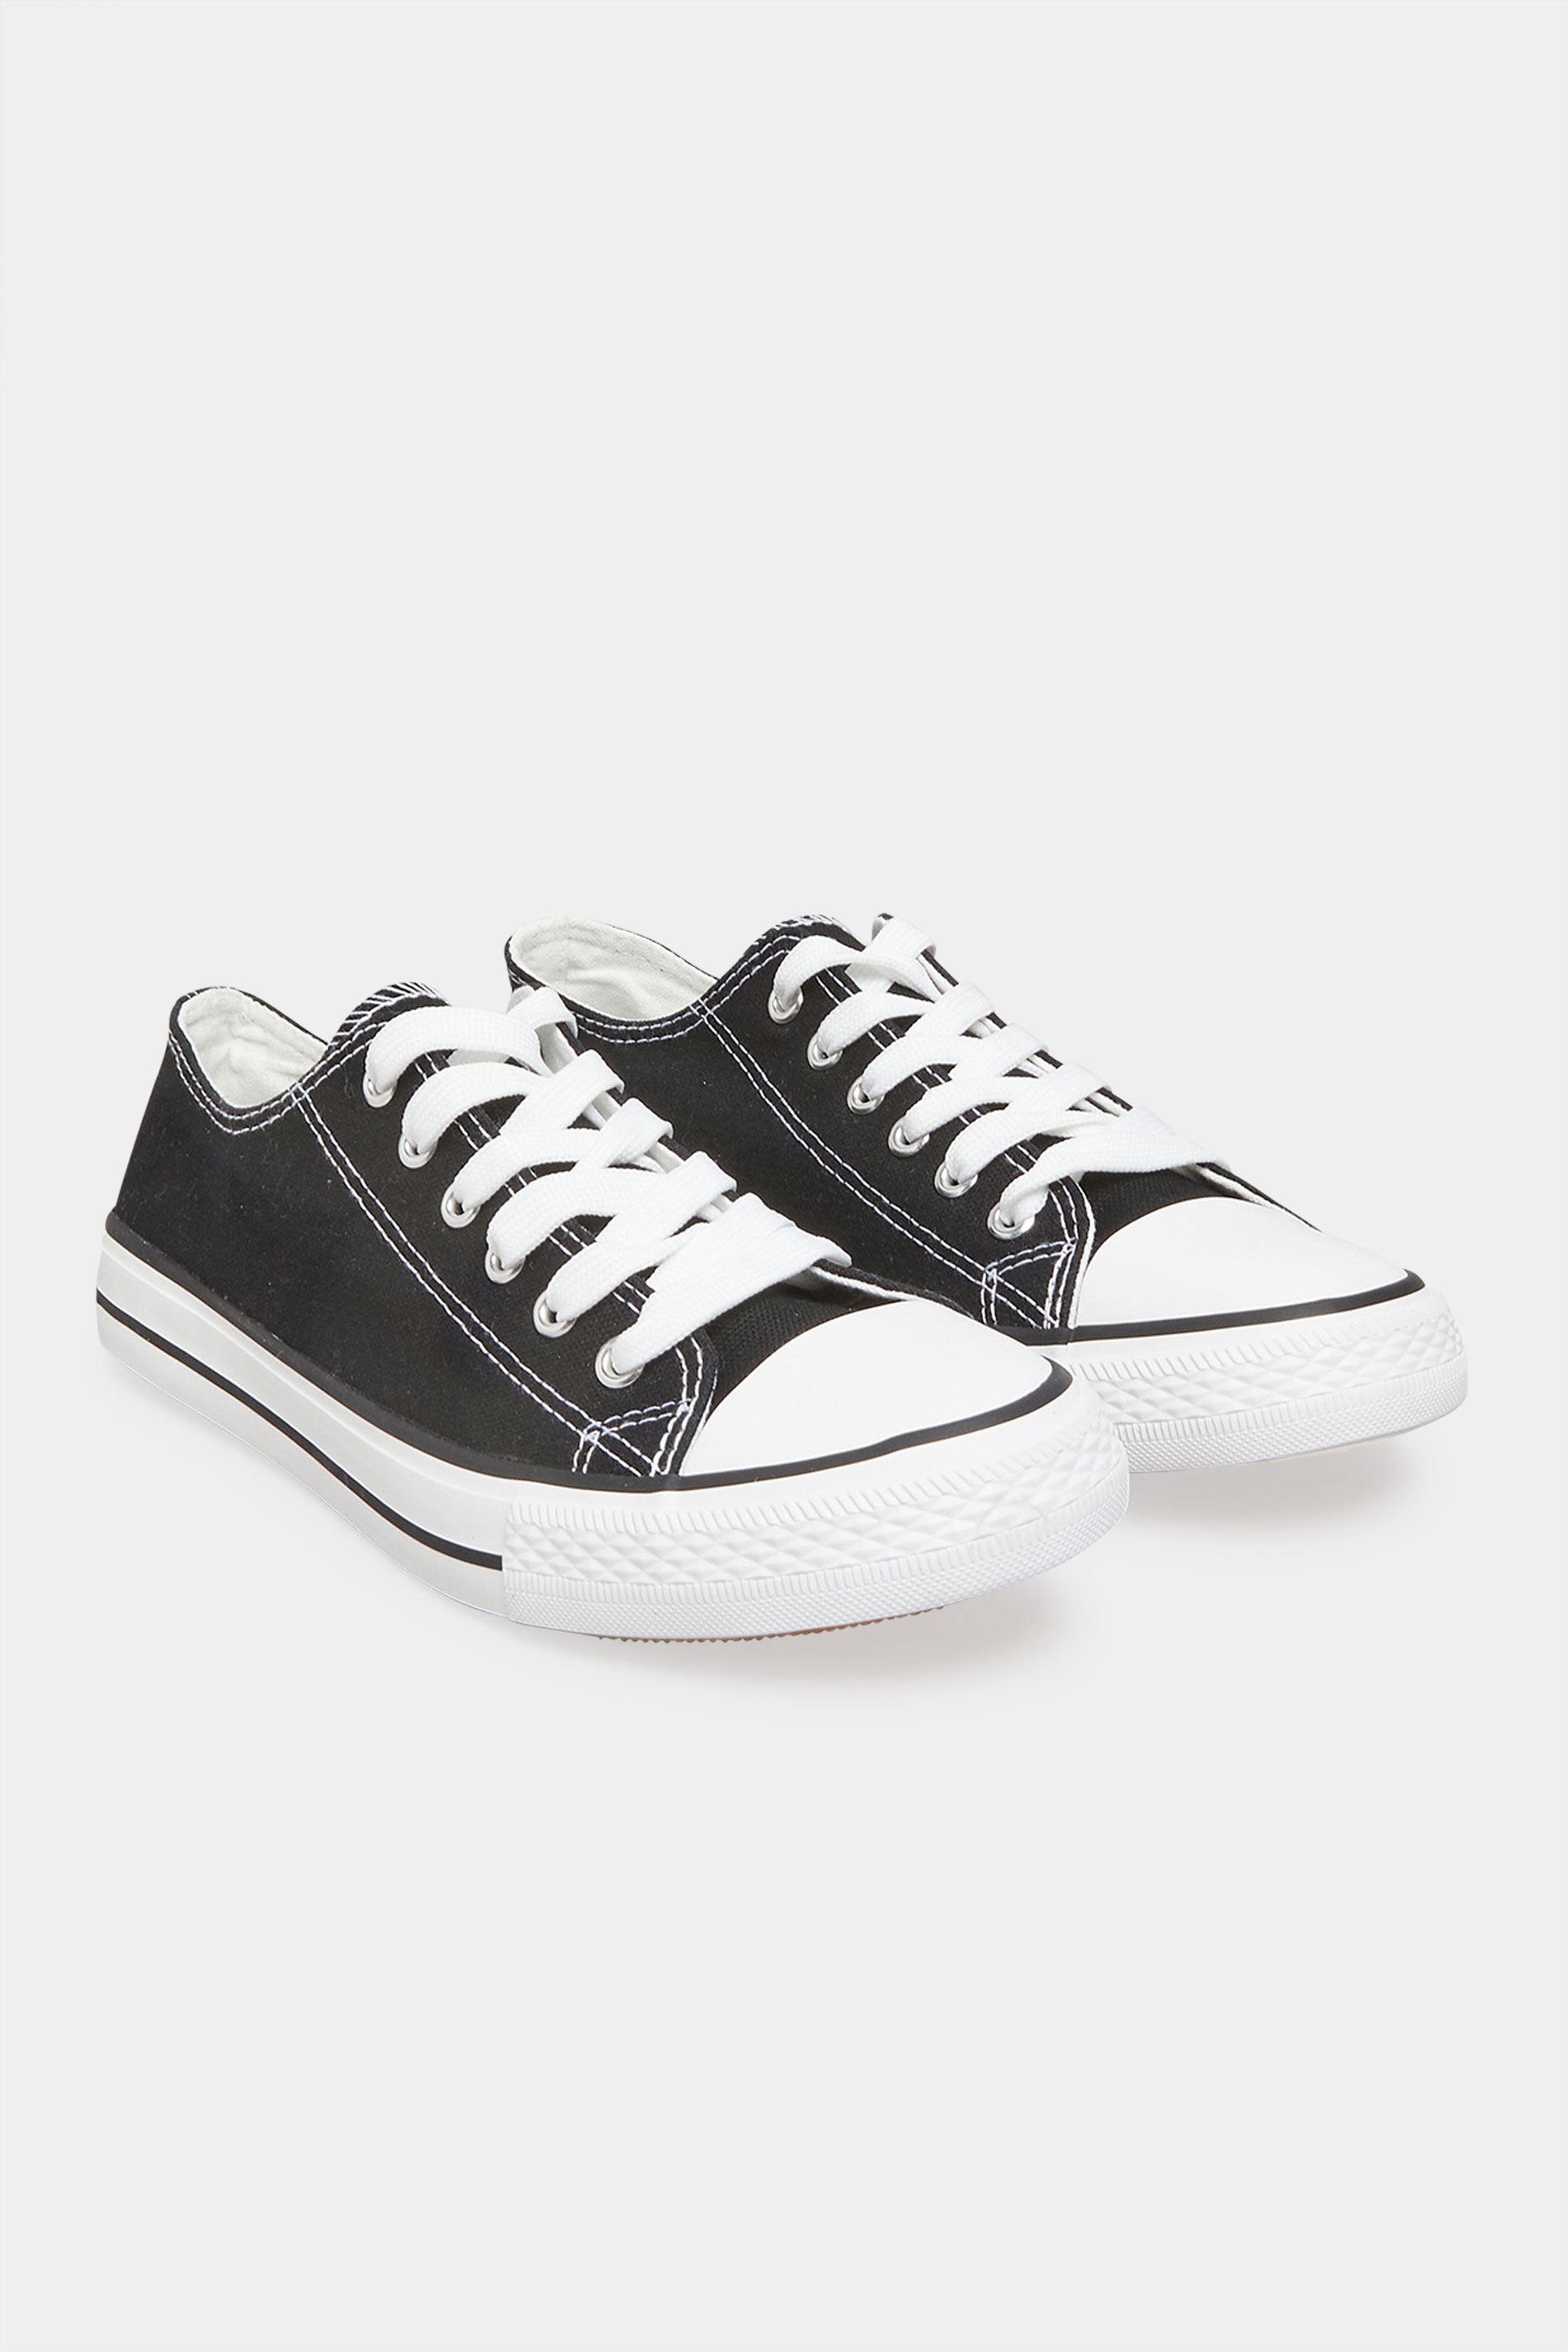 Black Canvas Low Trainers In Wide E Fit_AR.jpg